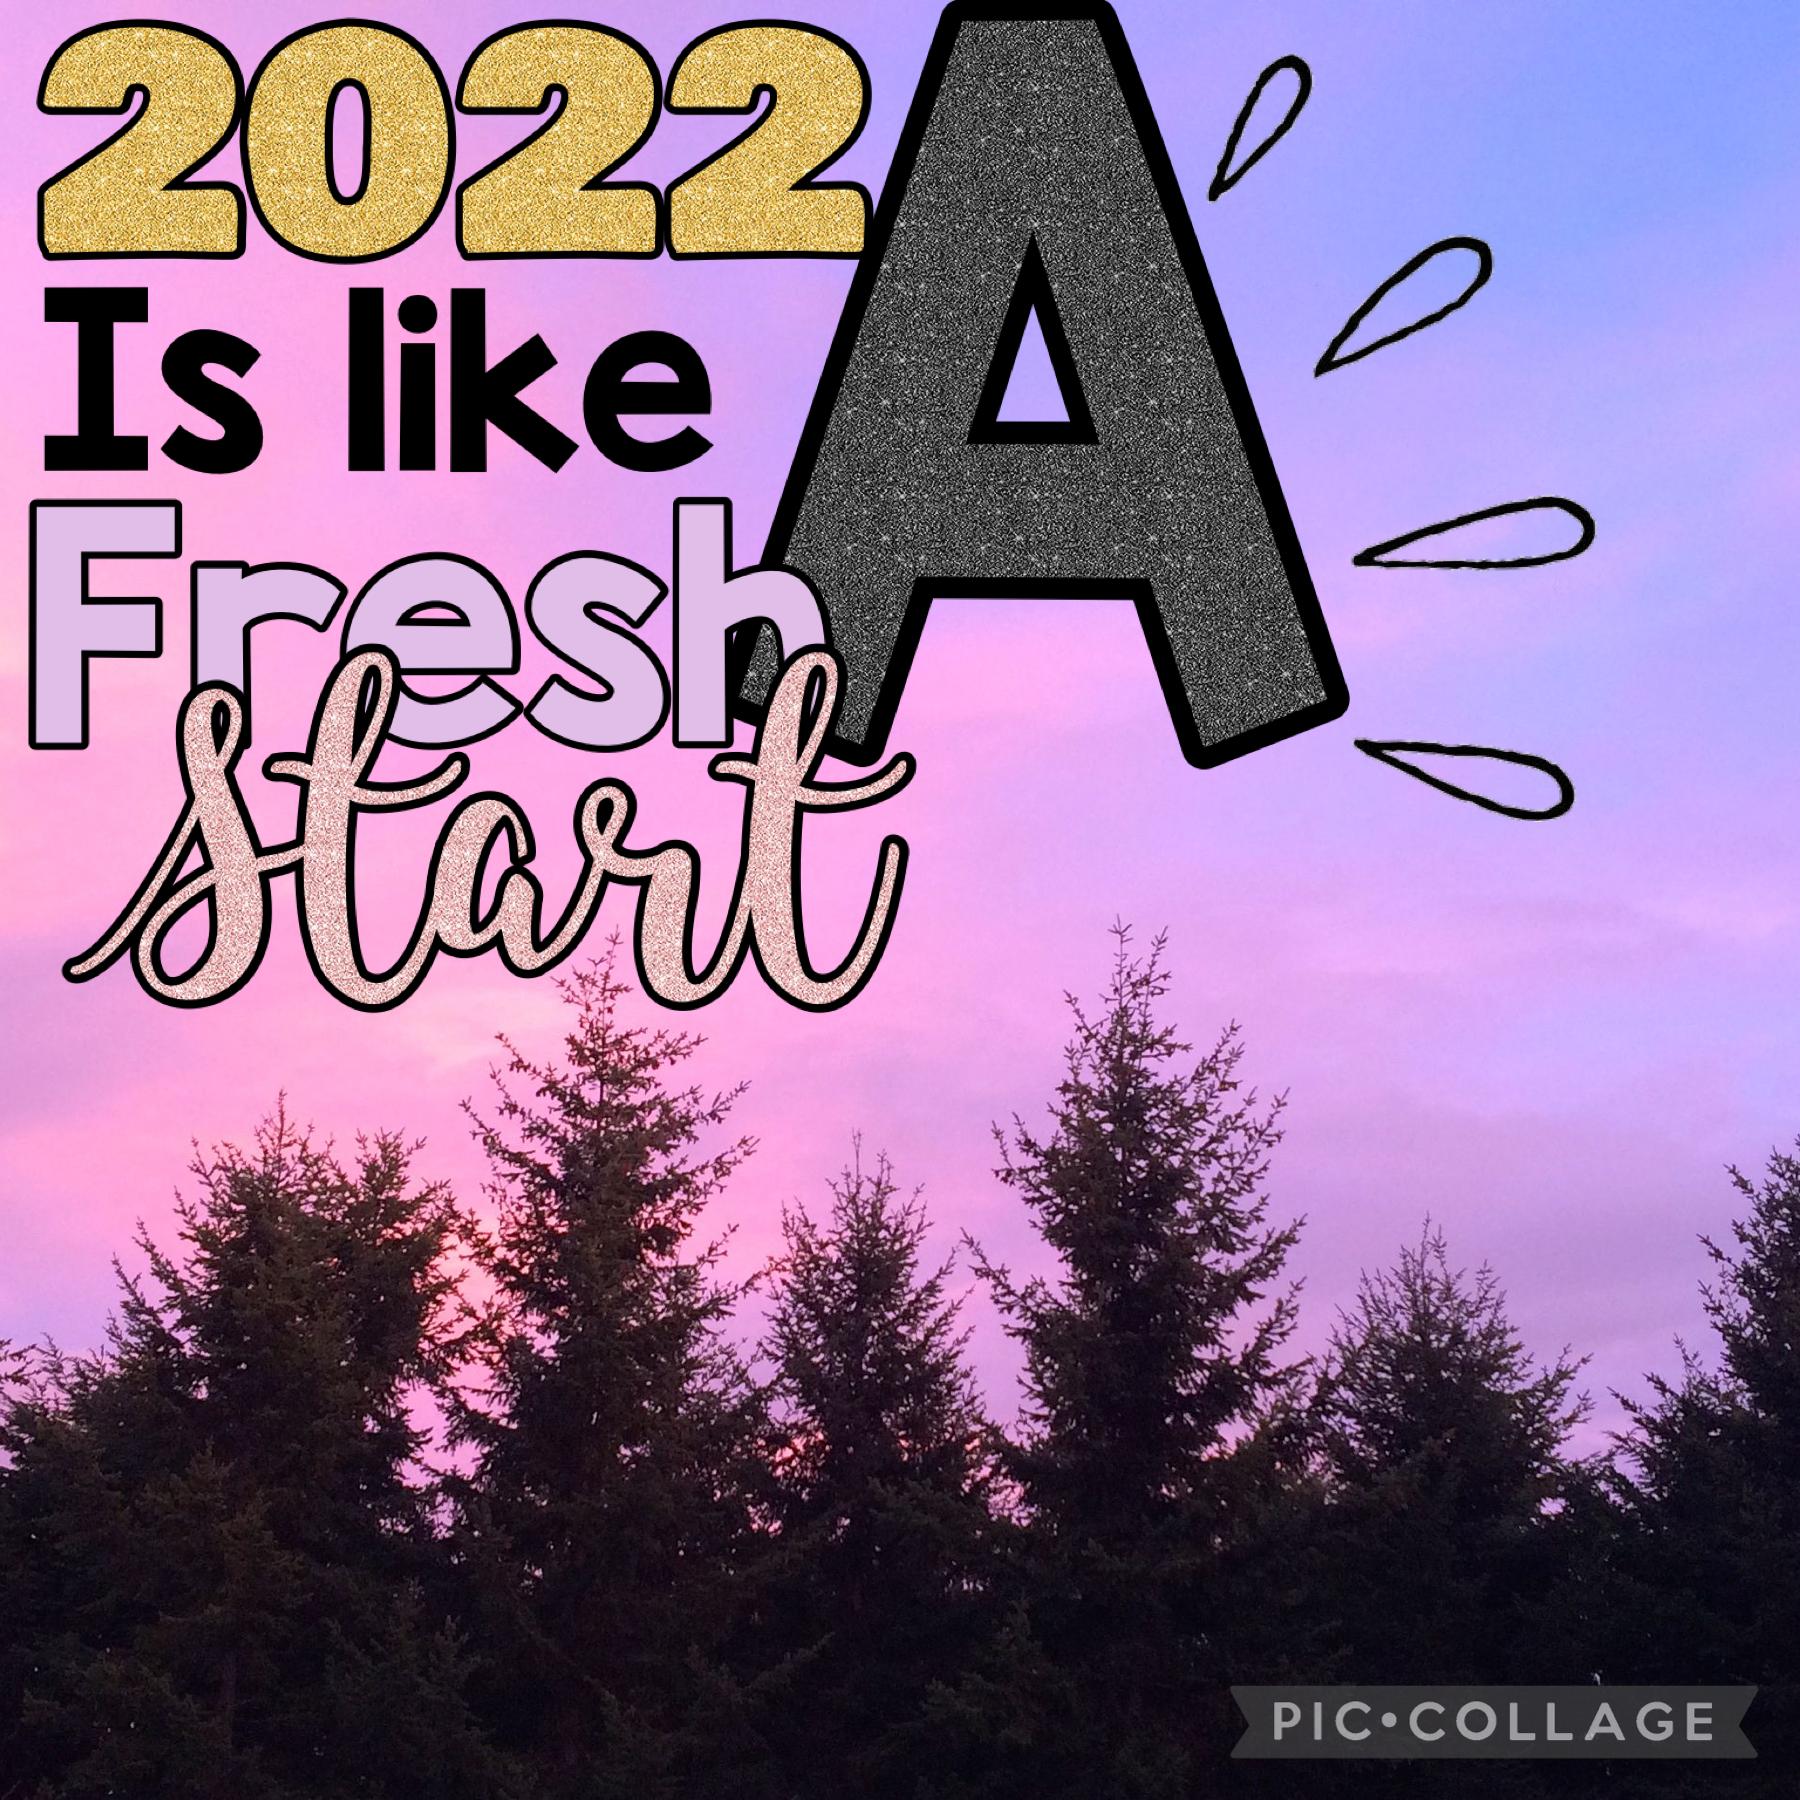 Yay 2022 finally!! The operation was a success!!hope y’all had a great 2021!